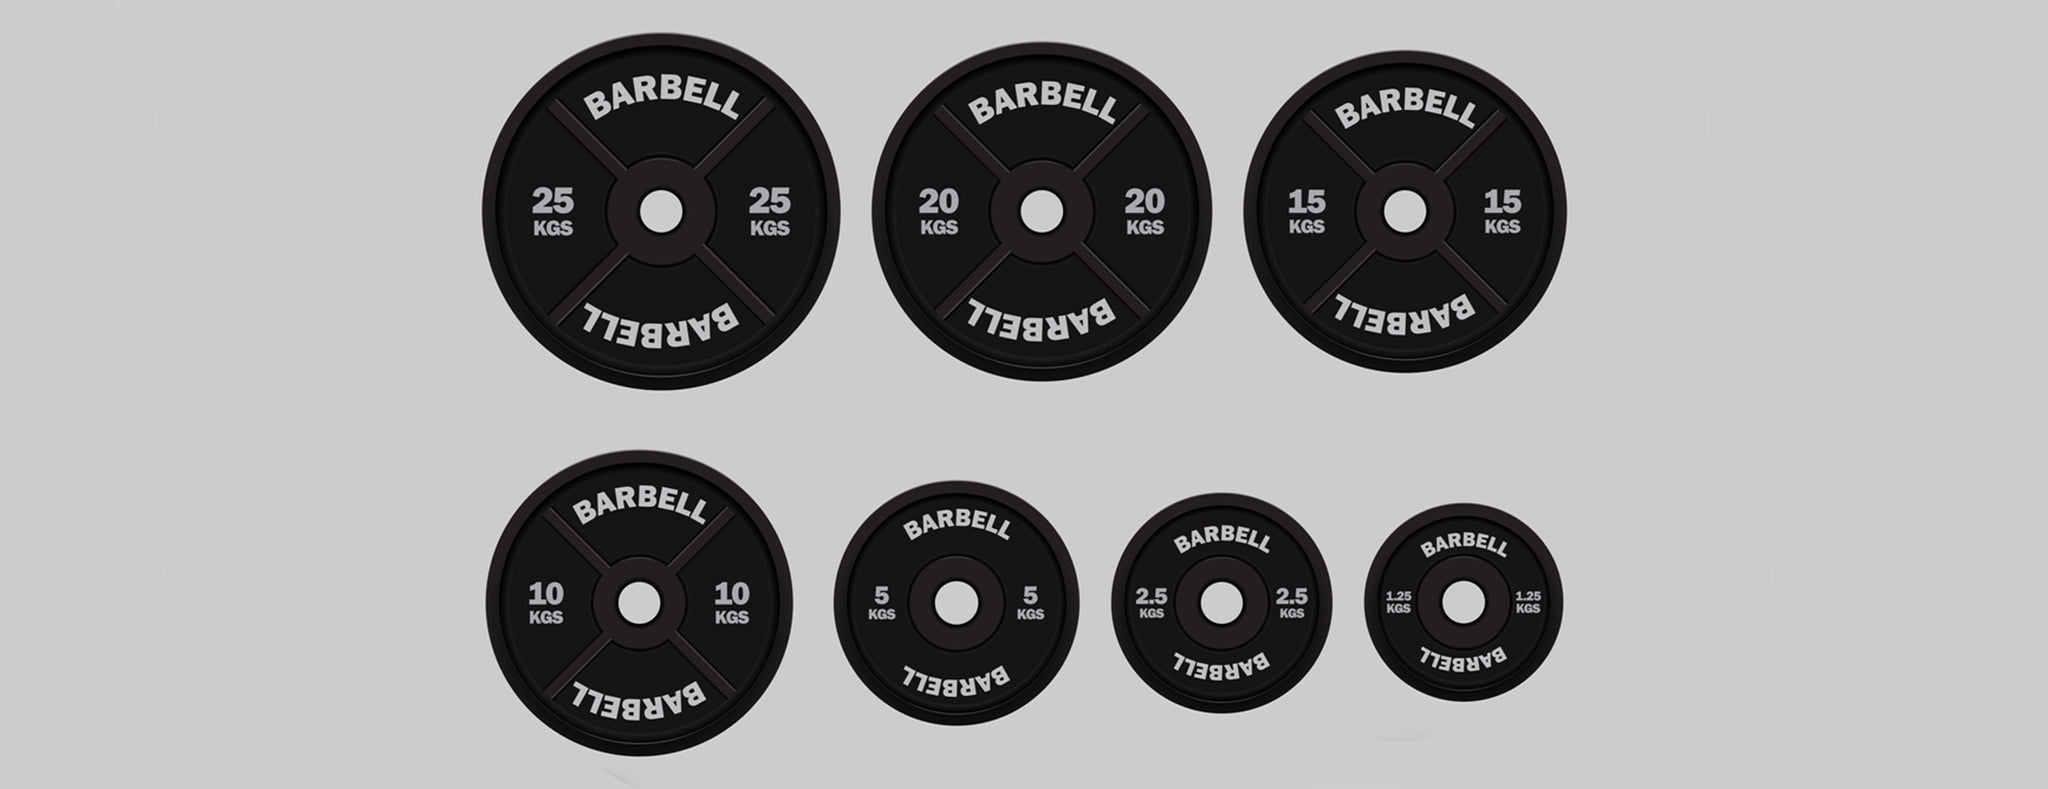 Additional Weight Plates